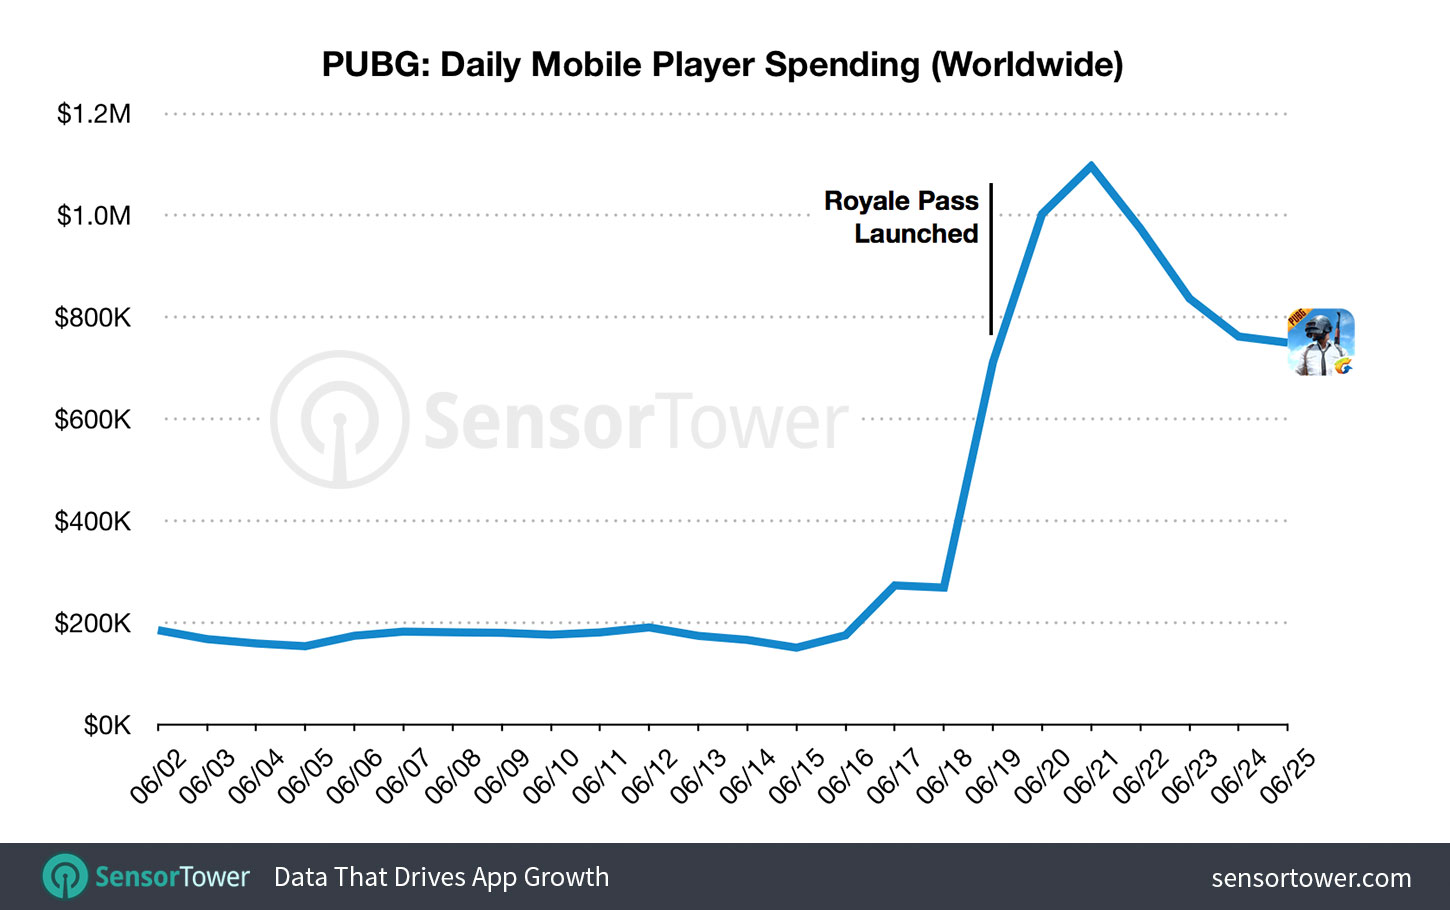 Chart showing PUBG Mobile's worldwide daily player spending for June 1 through June 25, 2018